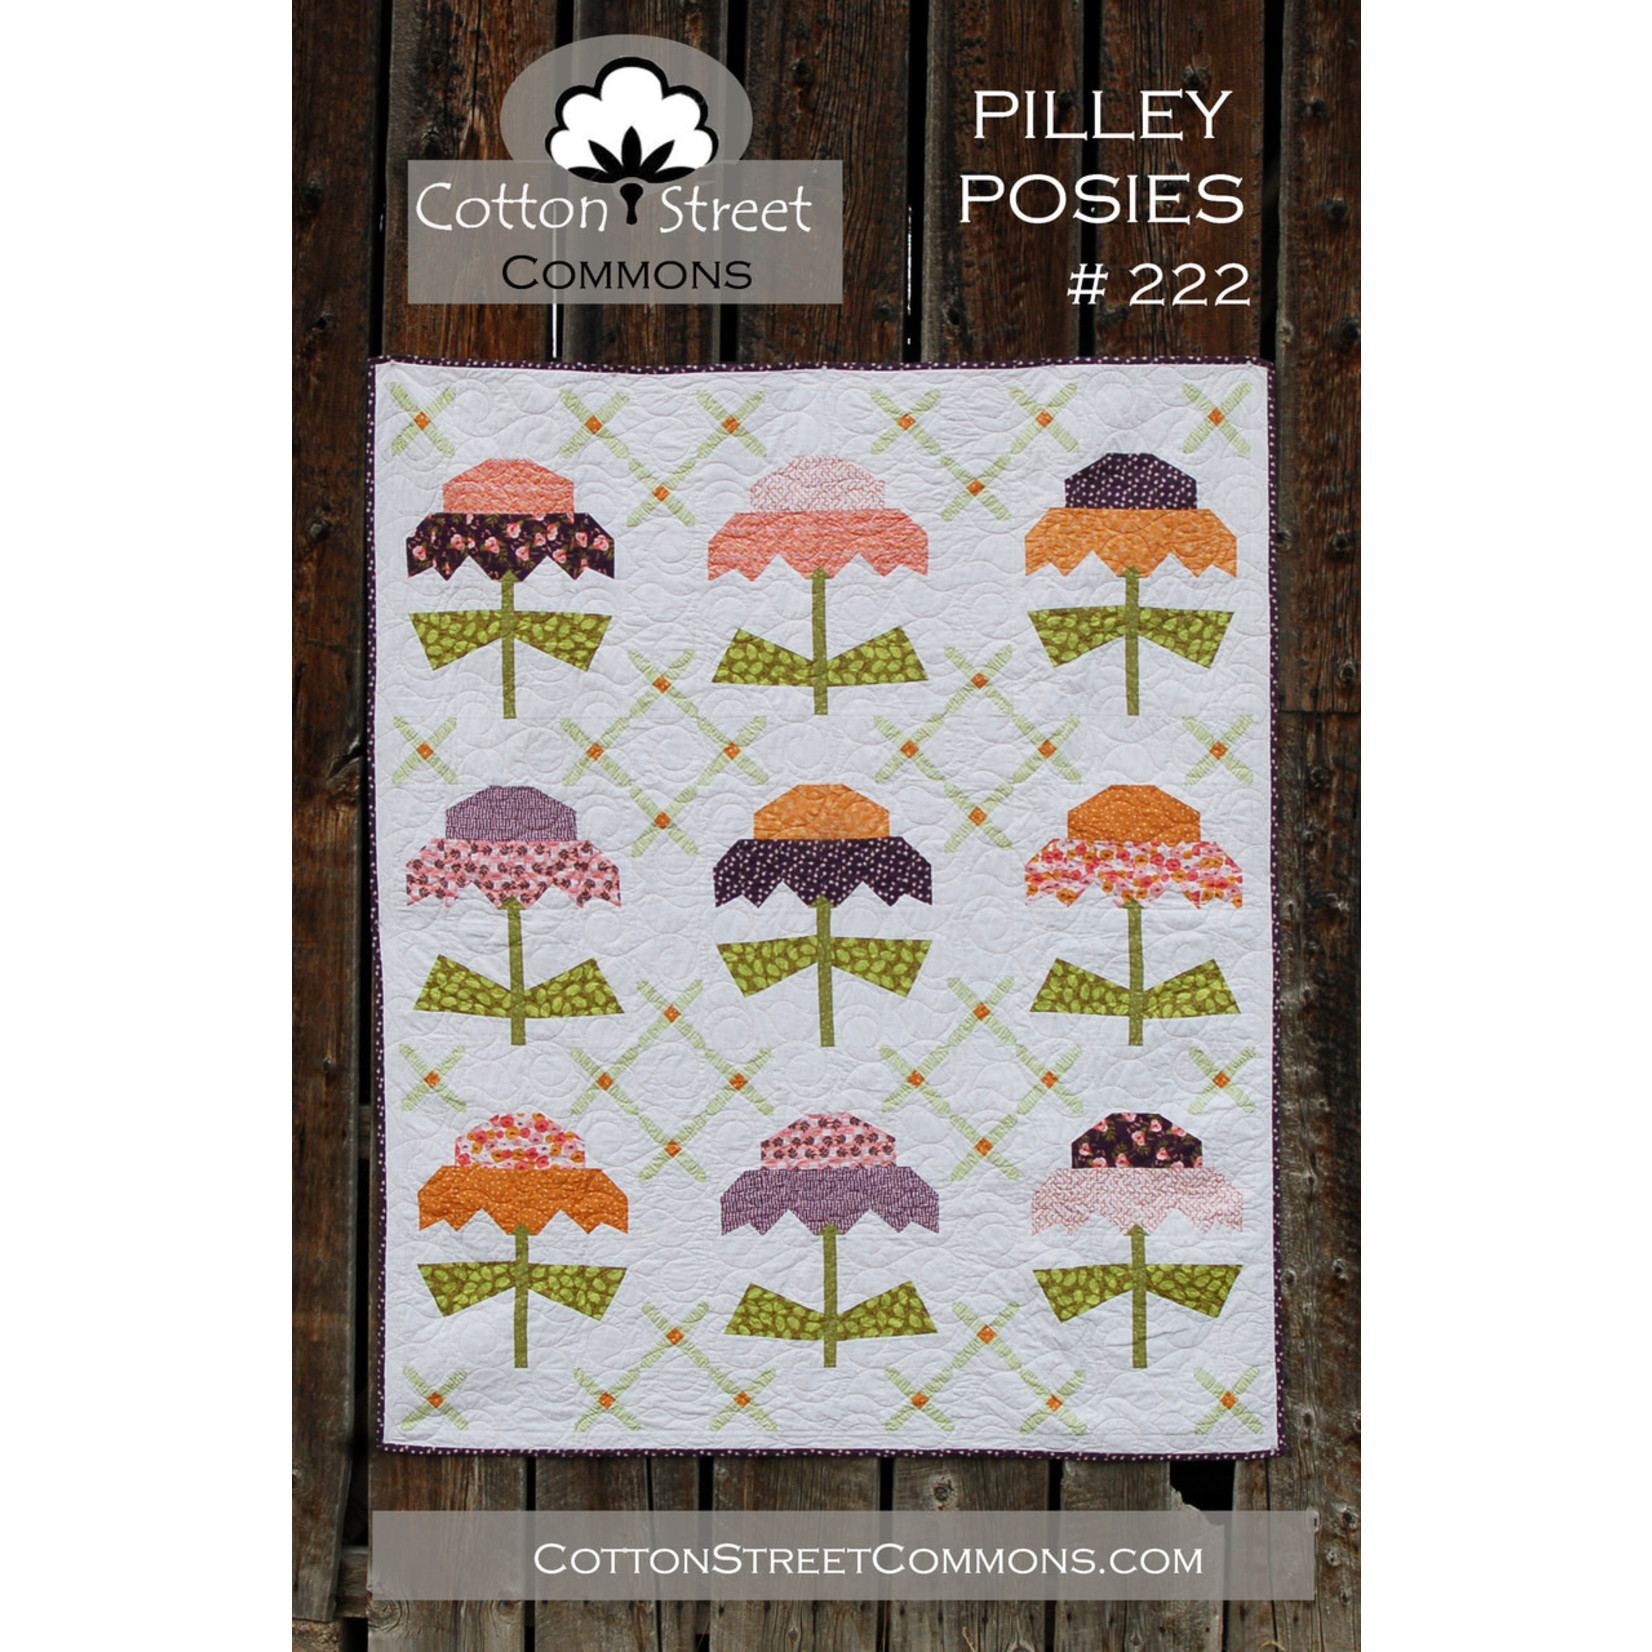 Cotton Street Commons Pilley Posies Pattern